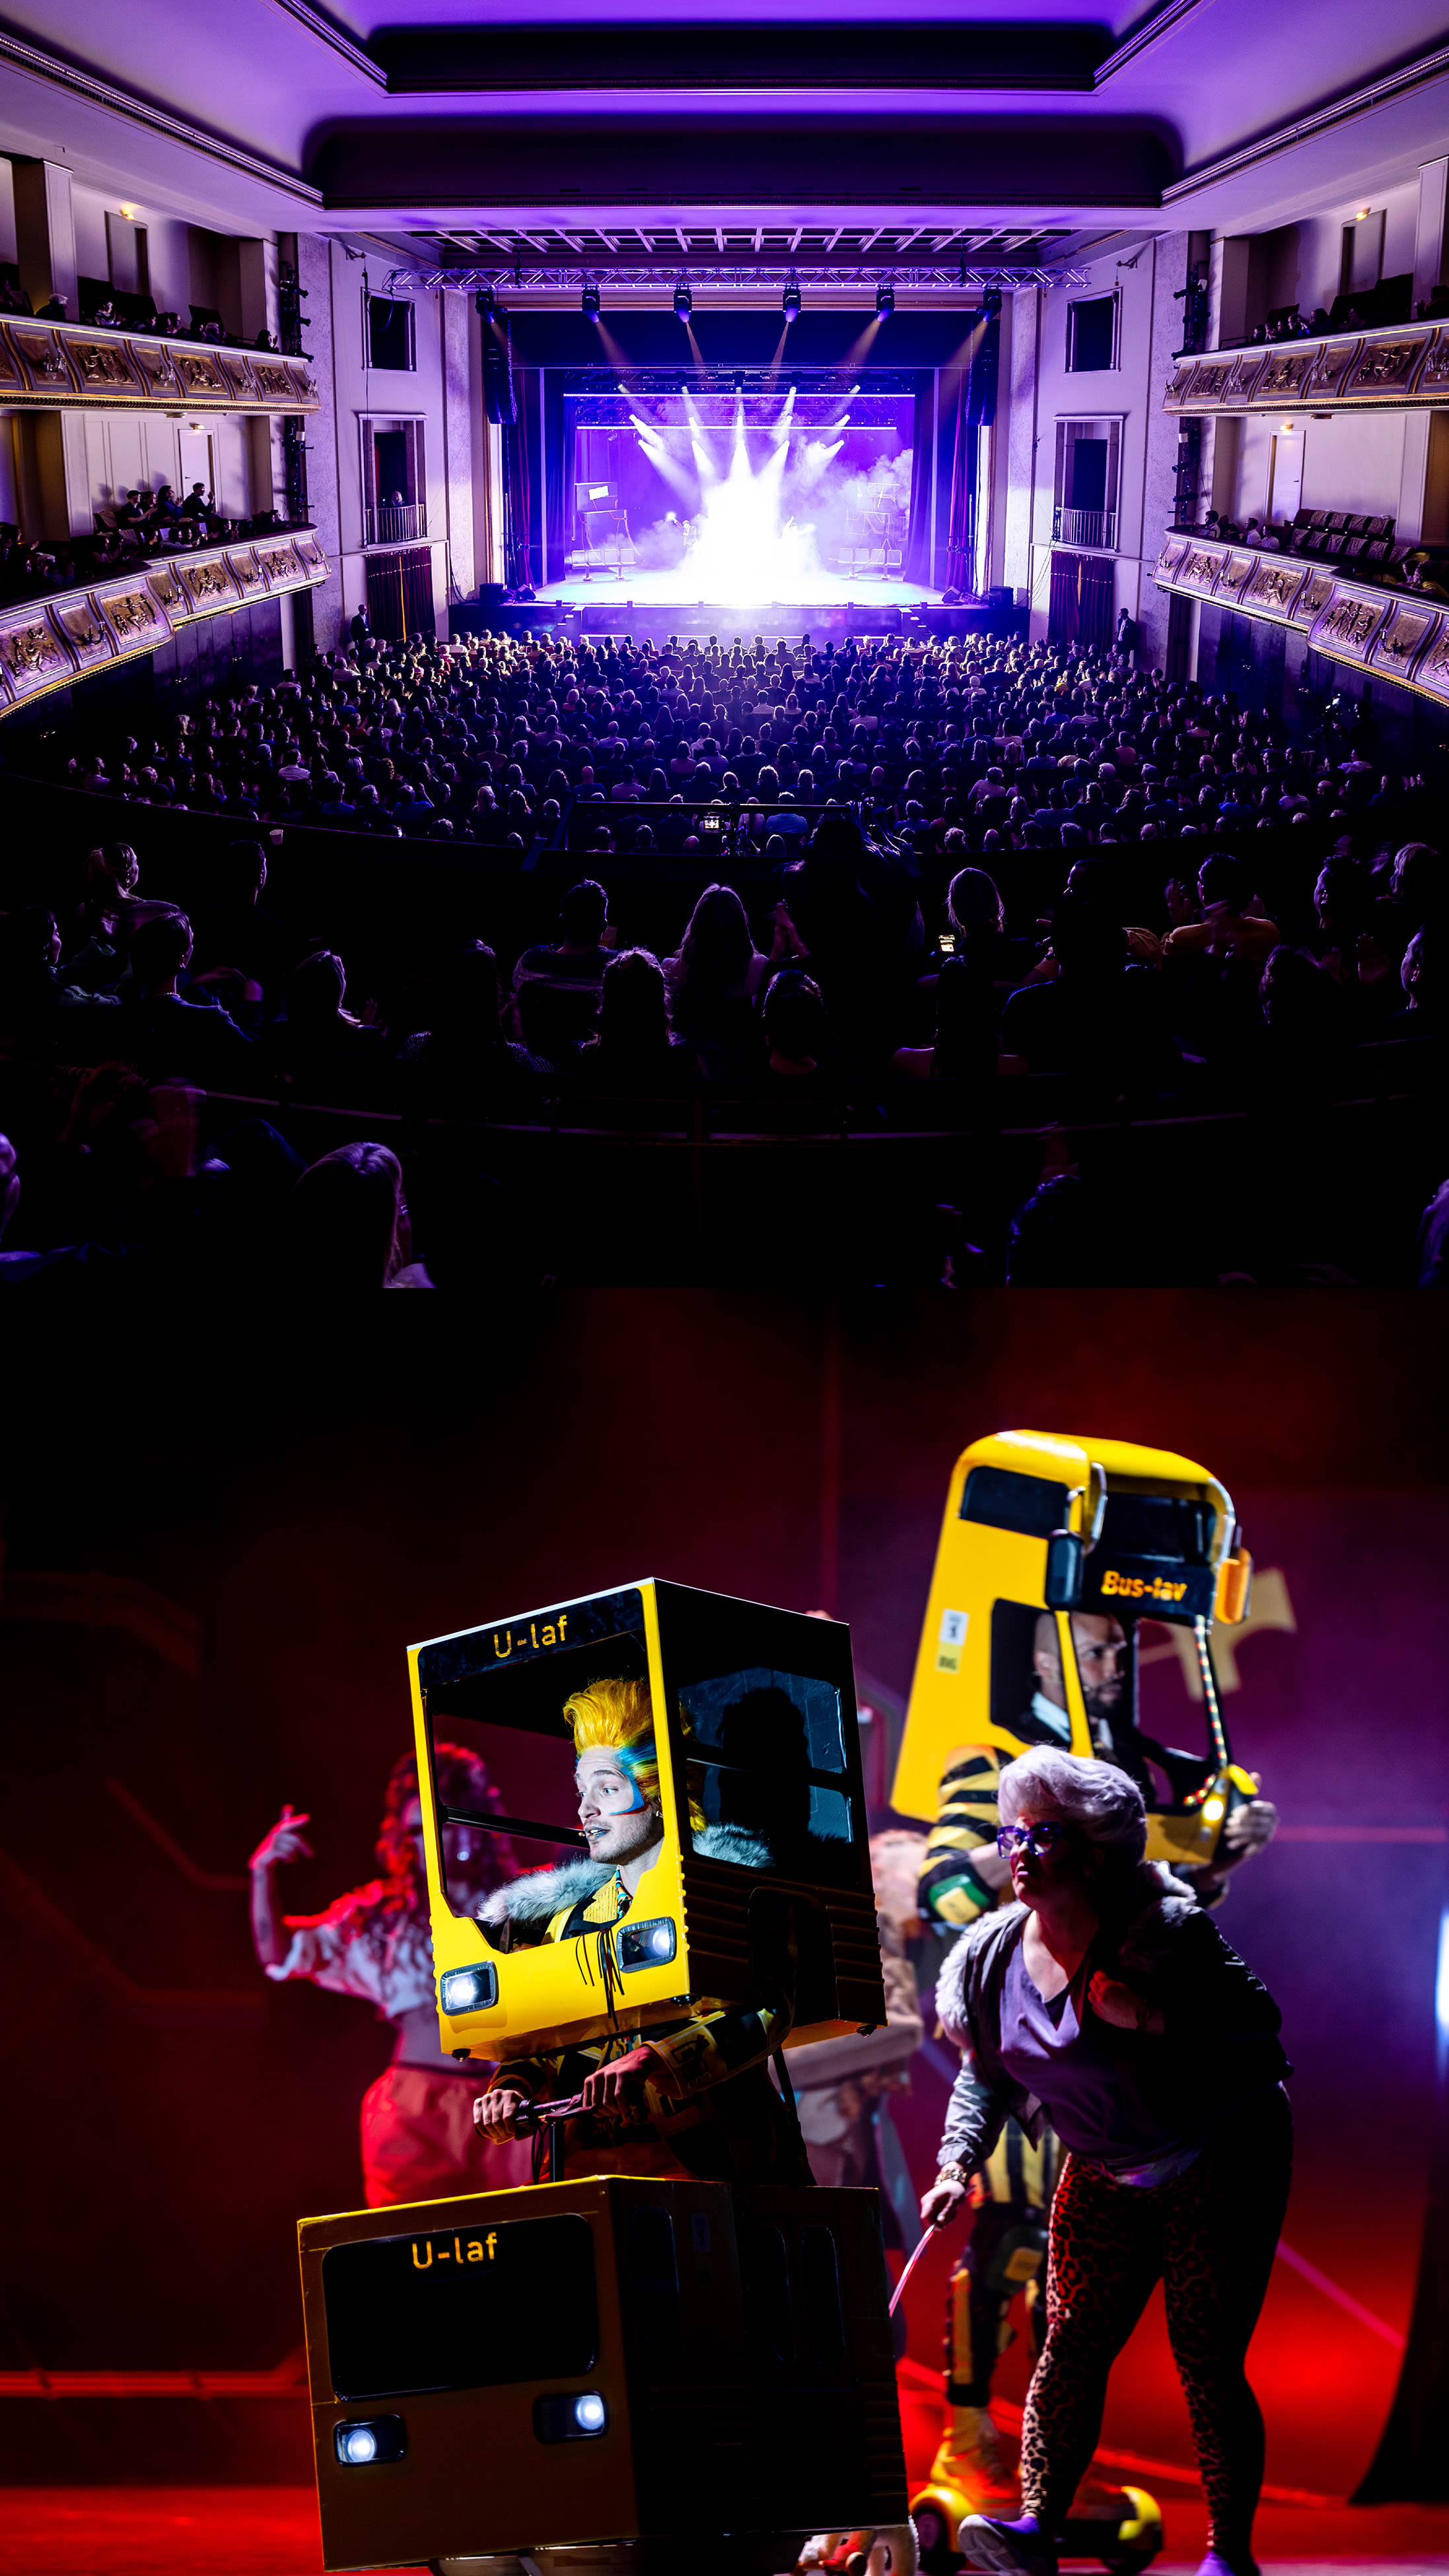 On the left, a large audience watches a brightly lit stage during a live performance at a theater. on the right, two characters resembling an older man and a robotic entity partake in an animated dialogue.